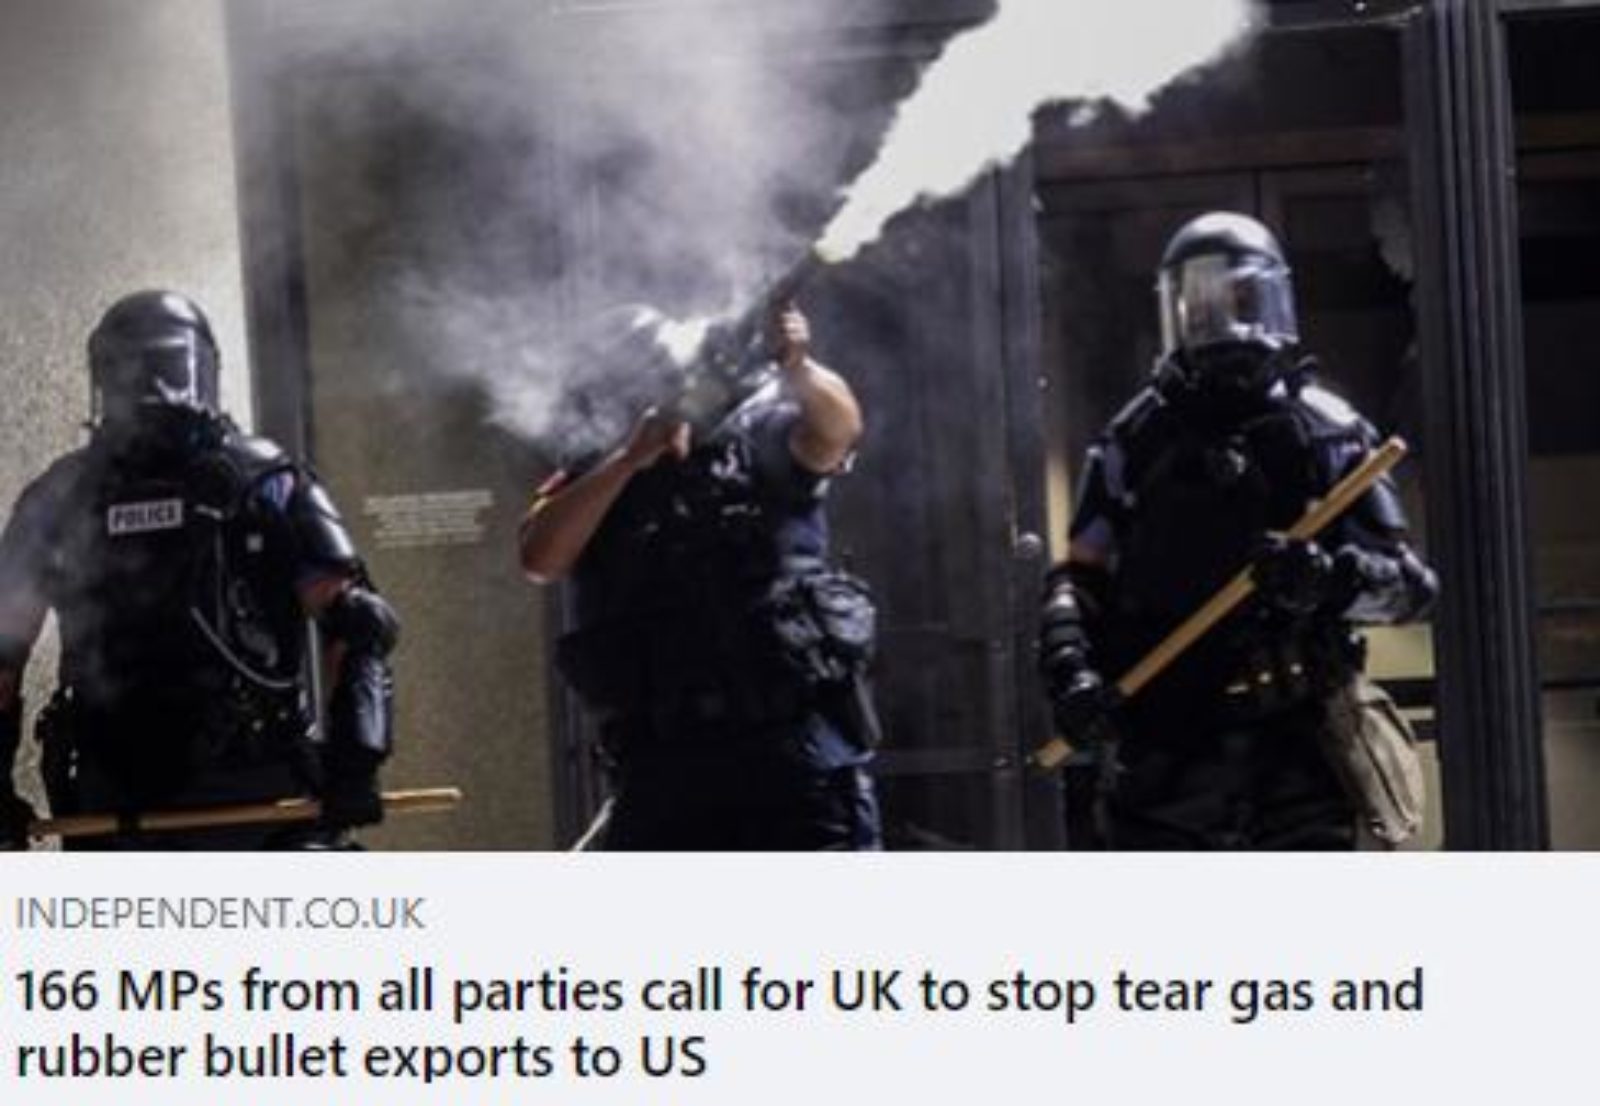 "George Floyd protests: 166 MPs from all parties call for UK to stop teargas and rubber bullet exports to US"